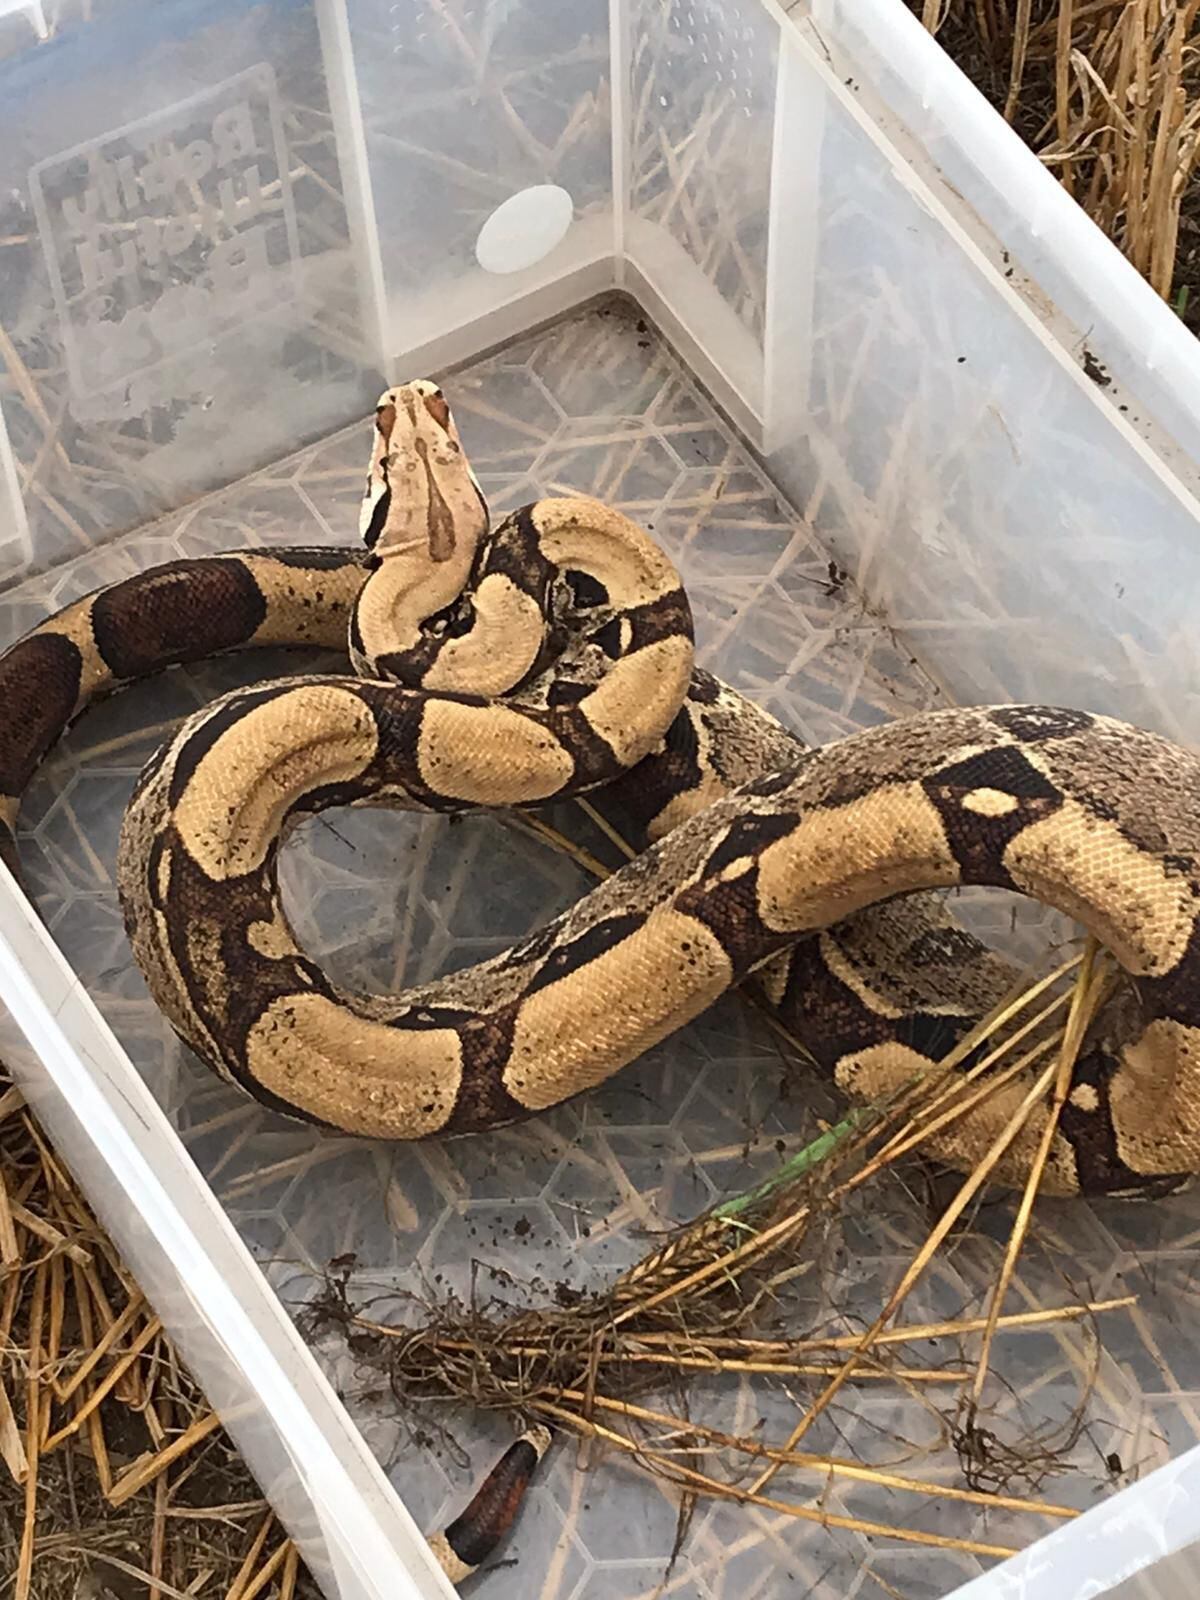 The second boa constrictor found near Baschurch five days after the first snake was found. Photo: Andy Bucknall